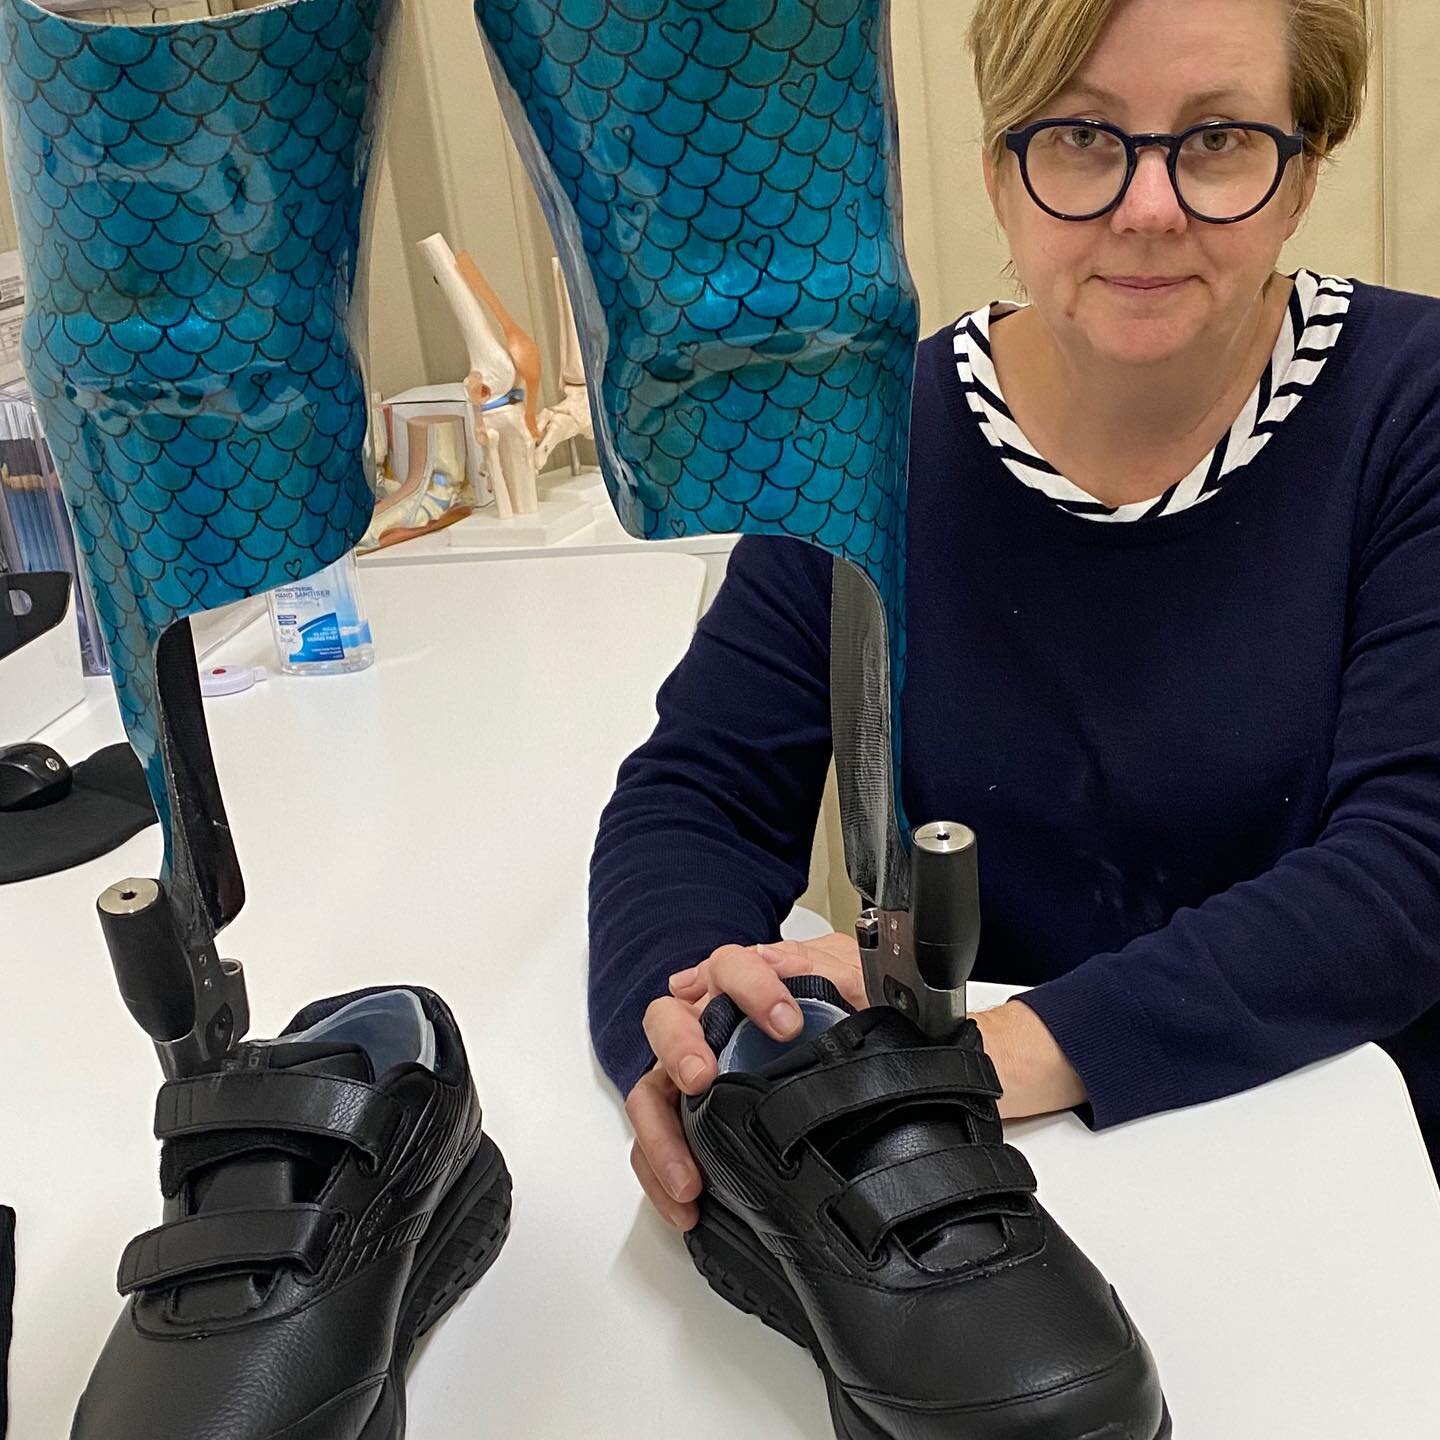 Bilateral AFO&rsquo;s with Ottobock Nexgear Tango ankle joints ready for a first fit.  Fabulous client choice of colour and pattern! 
@ottobock_australia @theathletesfootshepparton @ndis_australia @ottobock 
#orthoticsandprosthetics #custommade. #gou